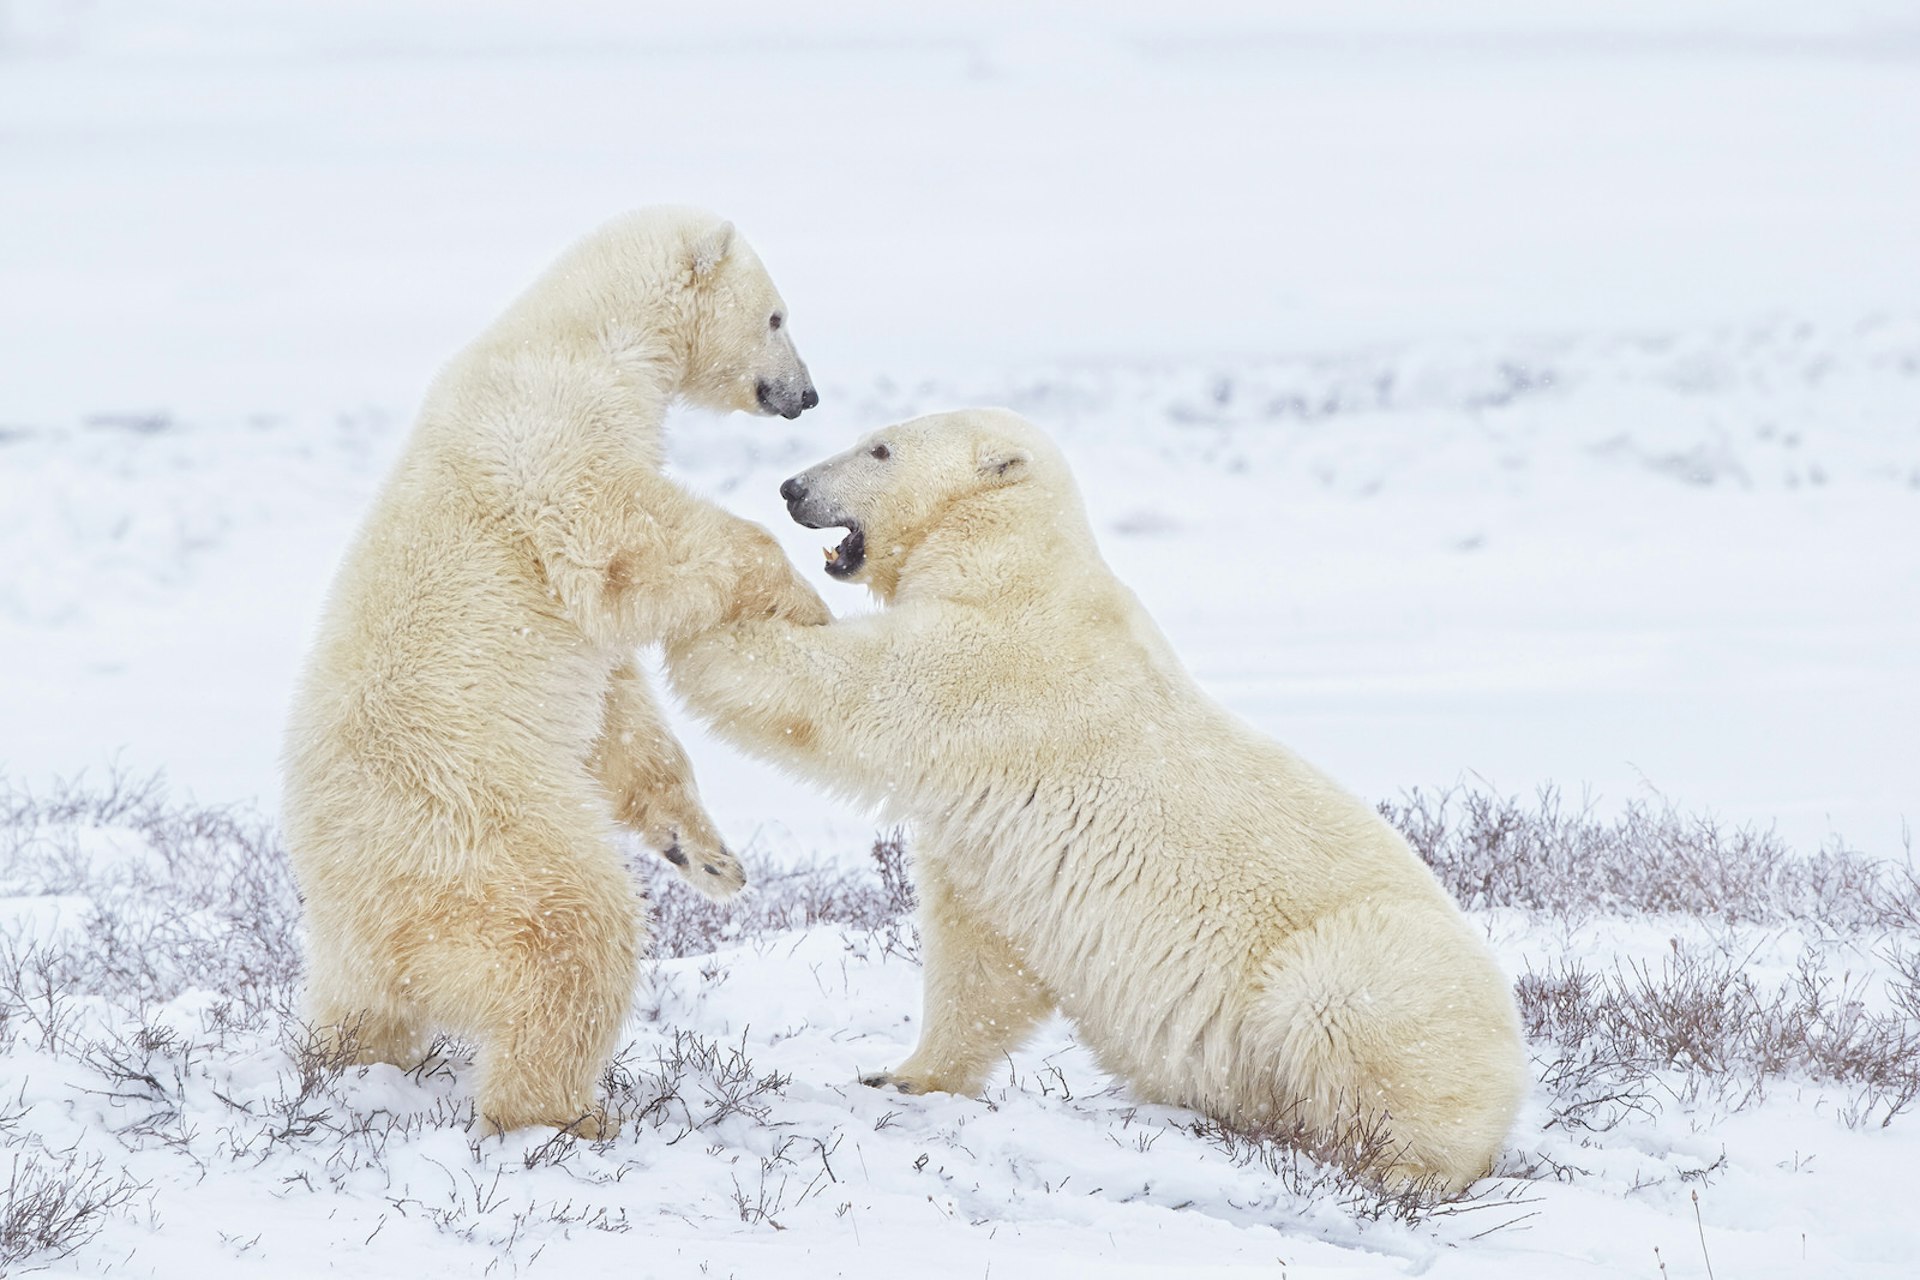 In Inuit folklore, polar bears (nanuq) were humans when inside their own homes, only wearing bear hides when outside © Jonathan Gregson / Lonely Planet